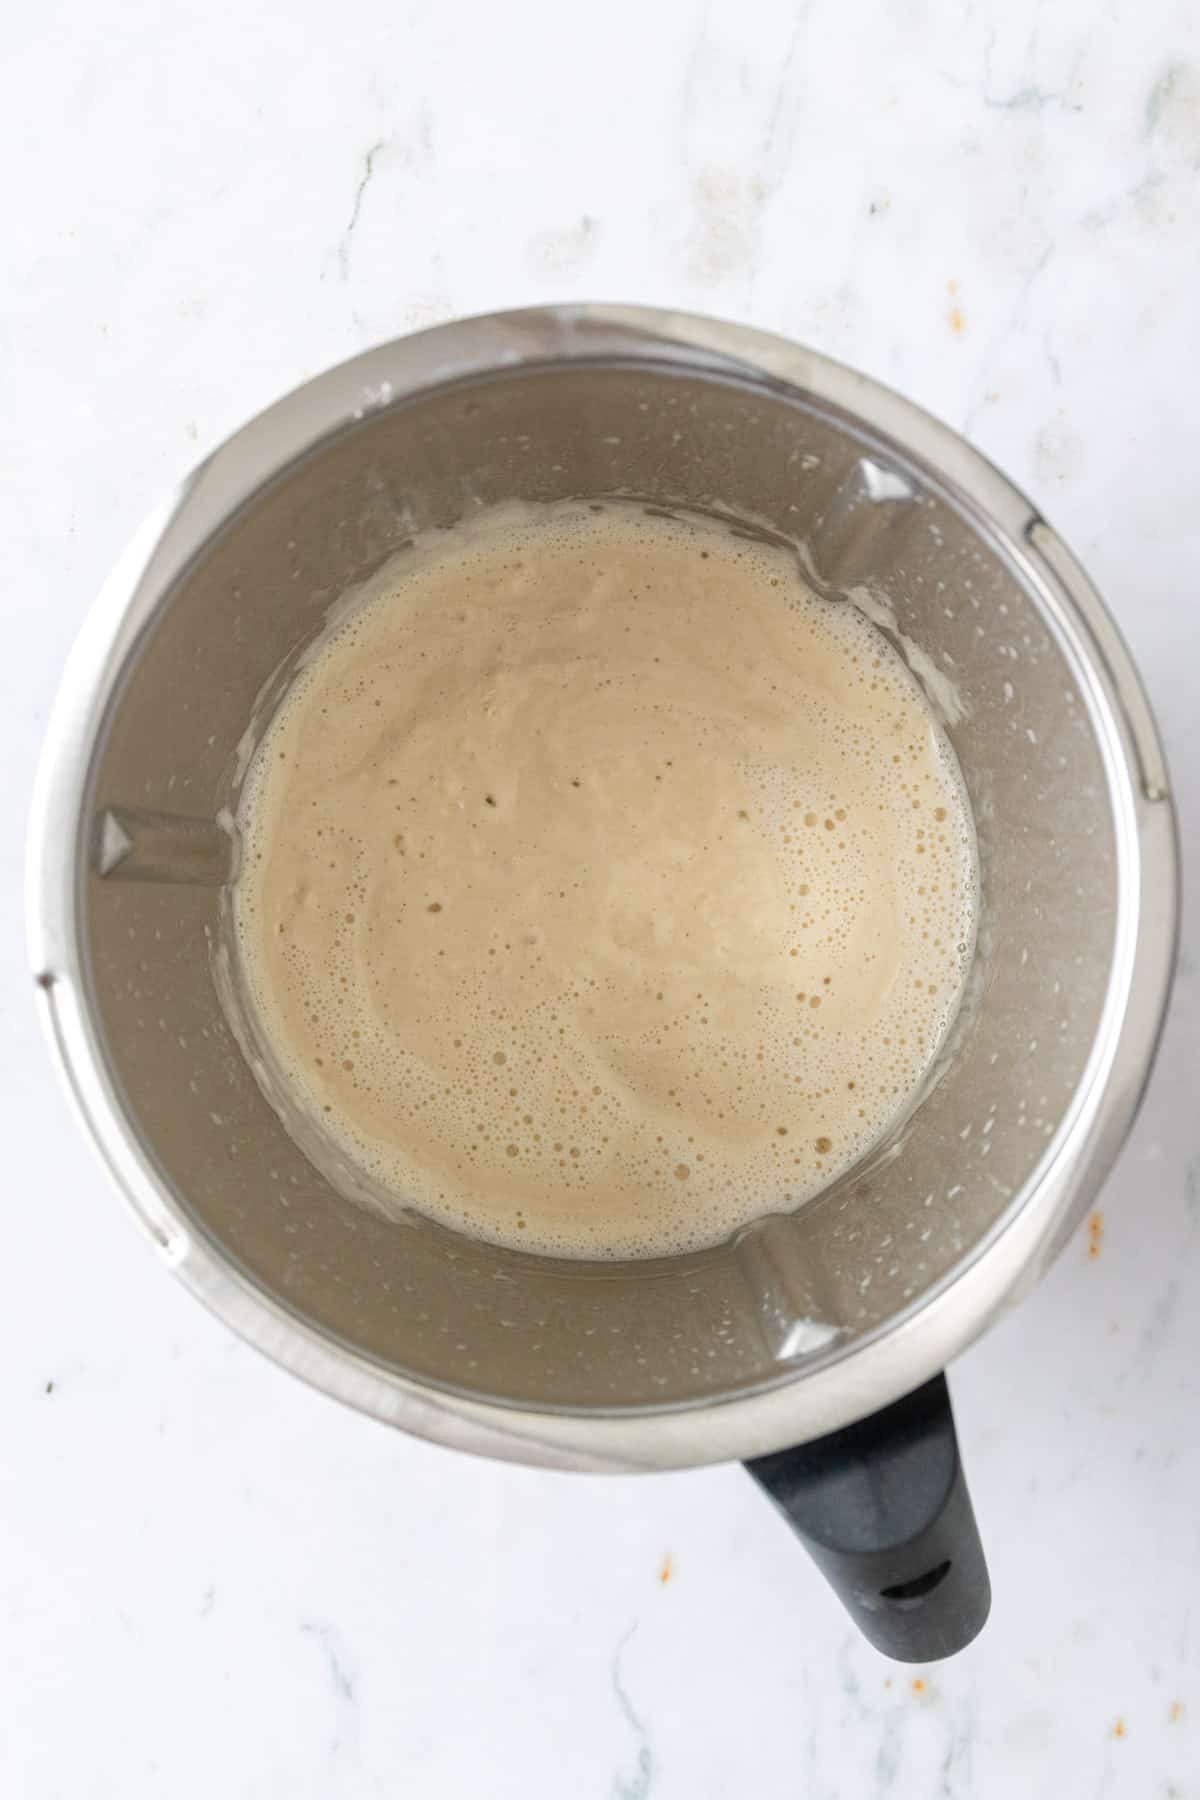 pancake batter inside the thermomix mixing bowl